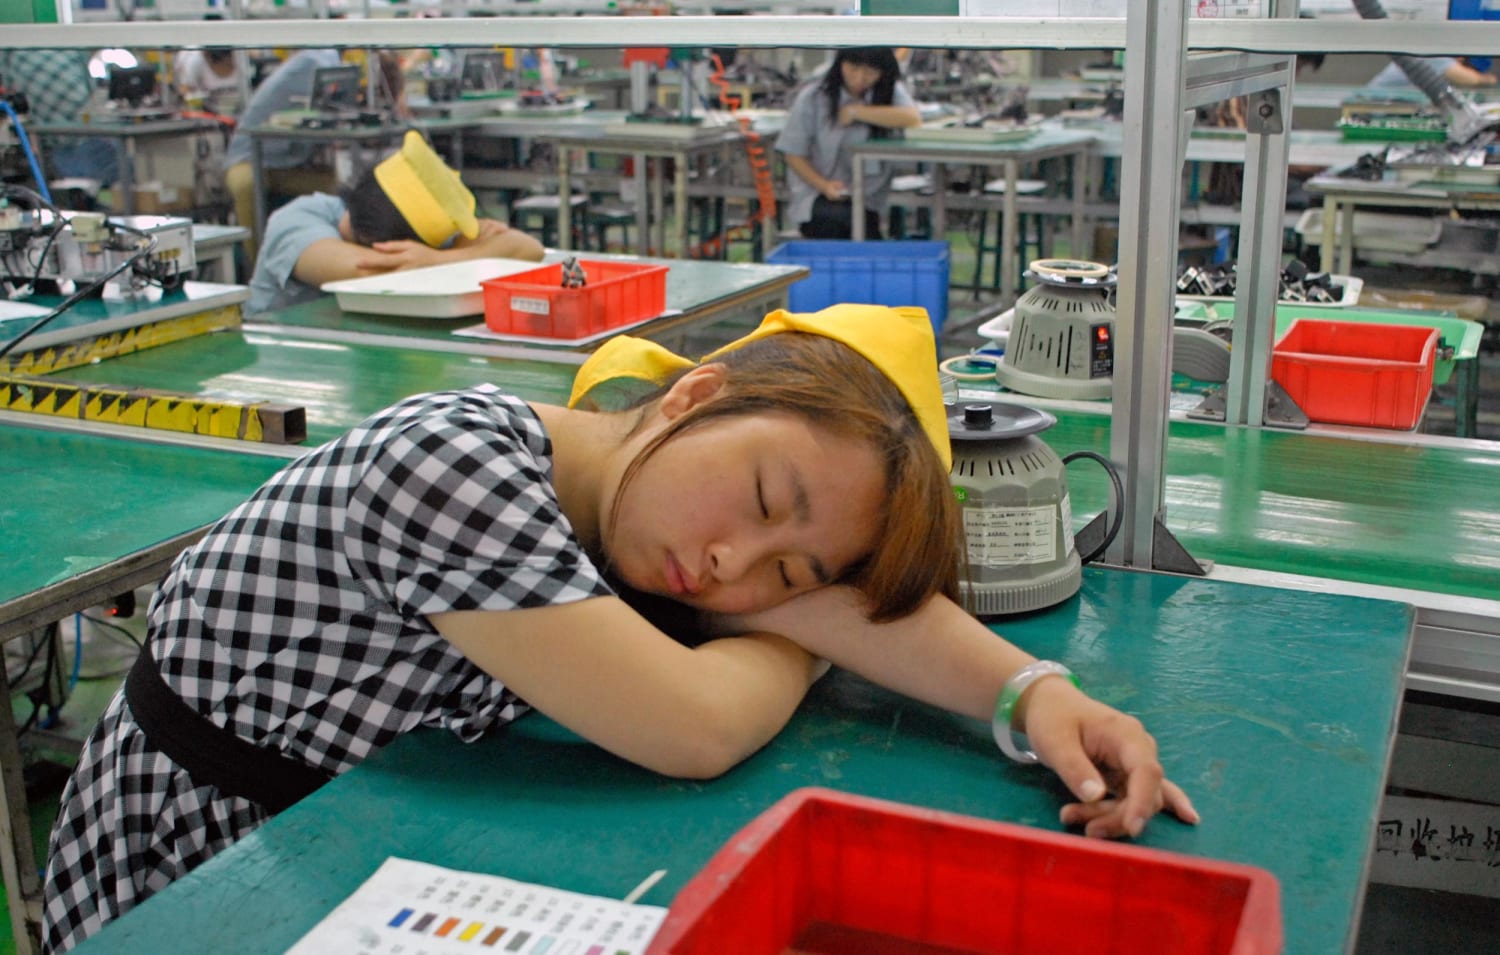 China Factory Workers Encouraged to Sleep on the Job